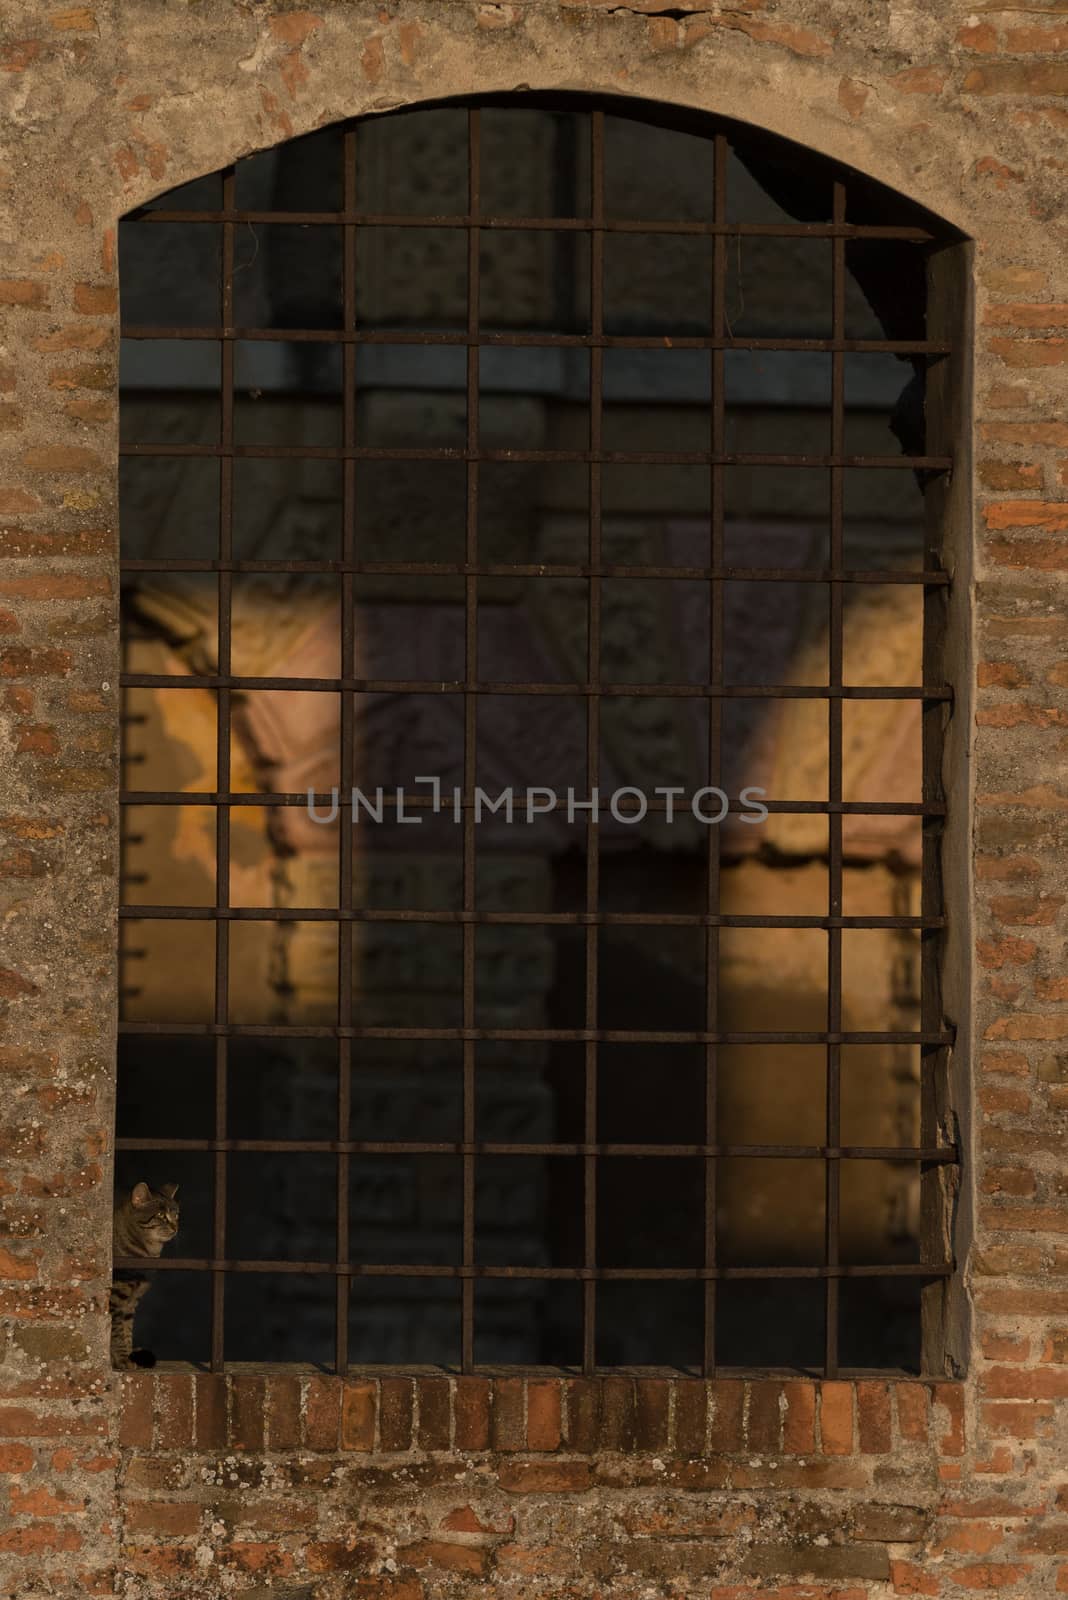 A kitten looks out from the grate of a window of an ancient building illuminated by the warm morning lights